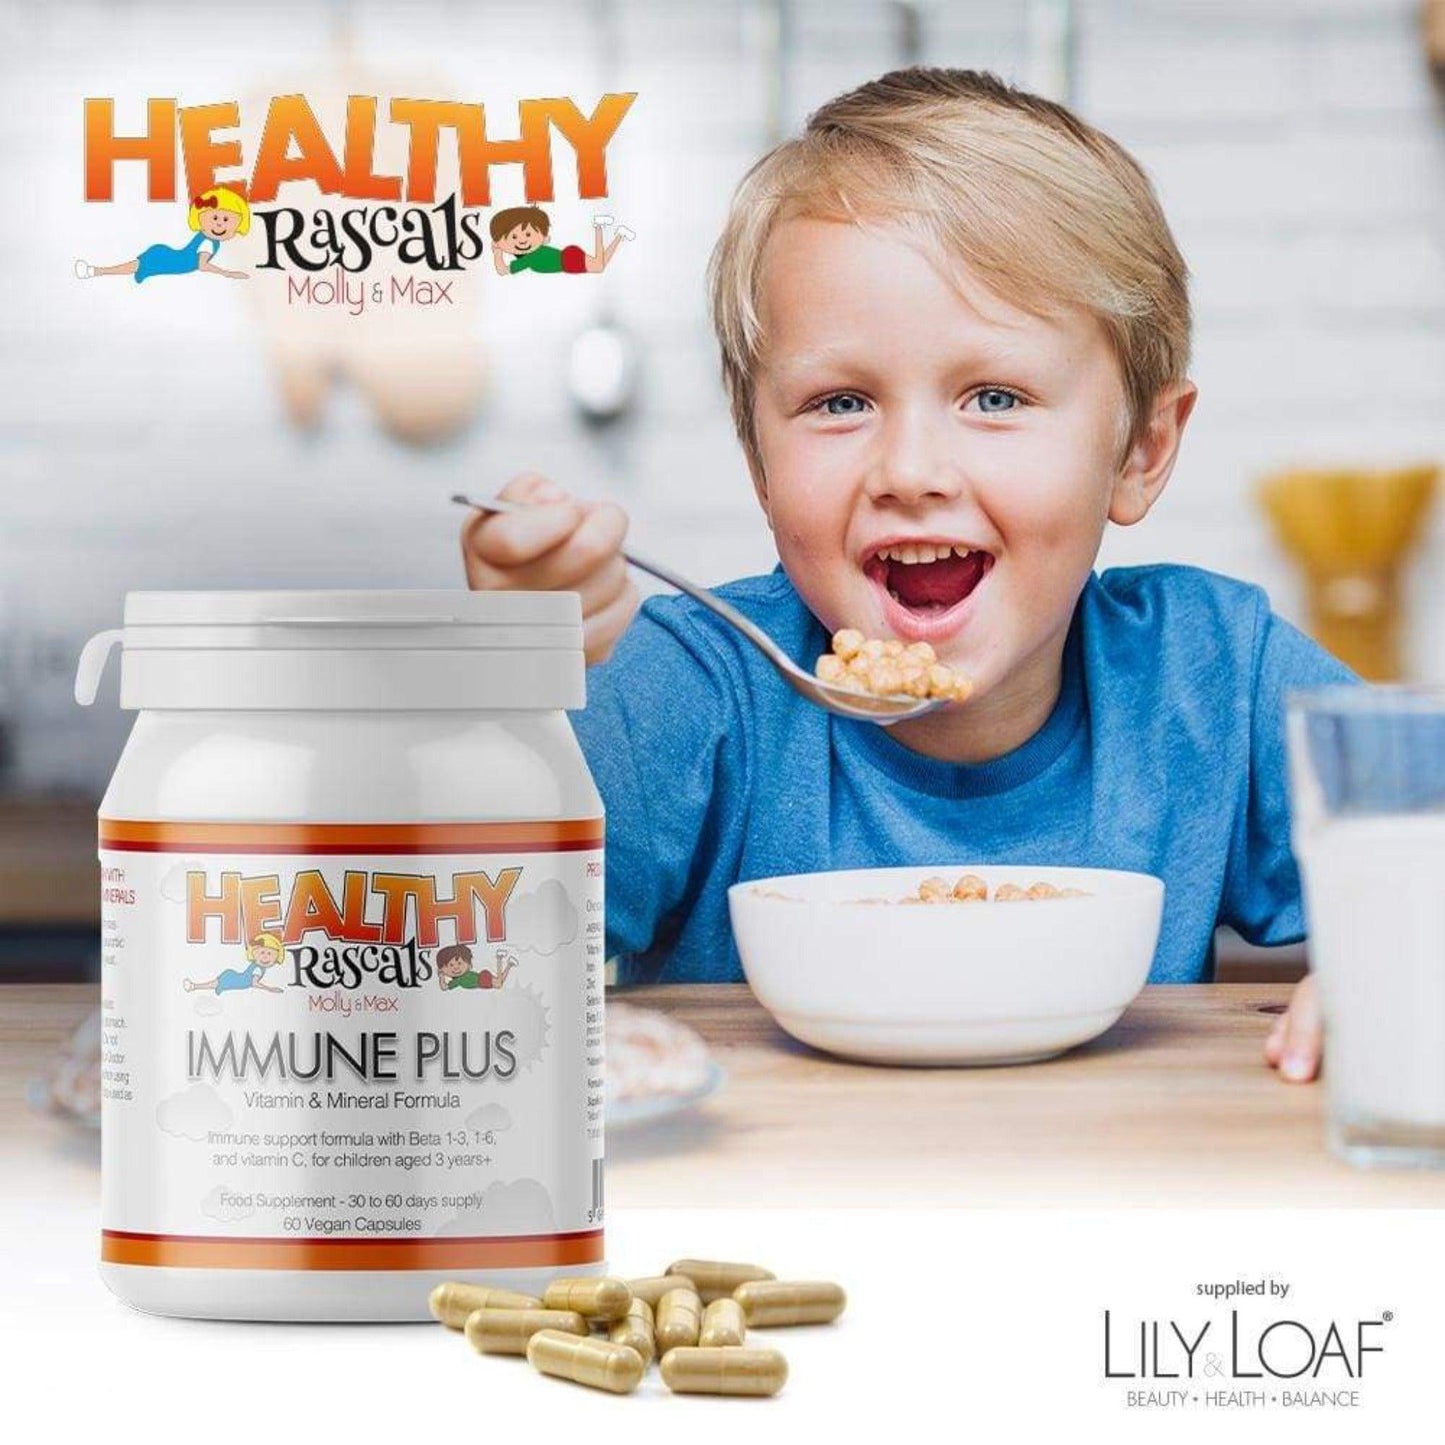 Immune Plus supplement with a child eating cereal in the background